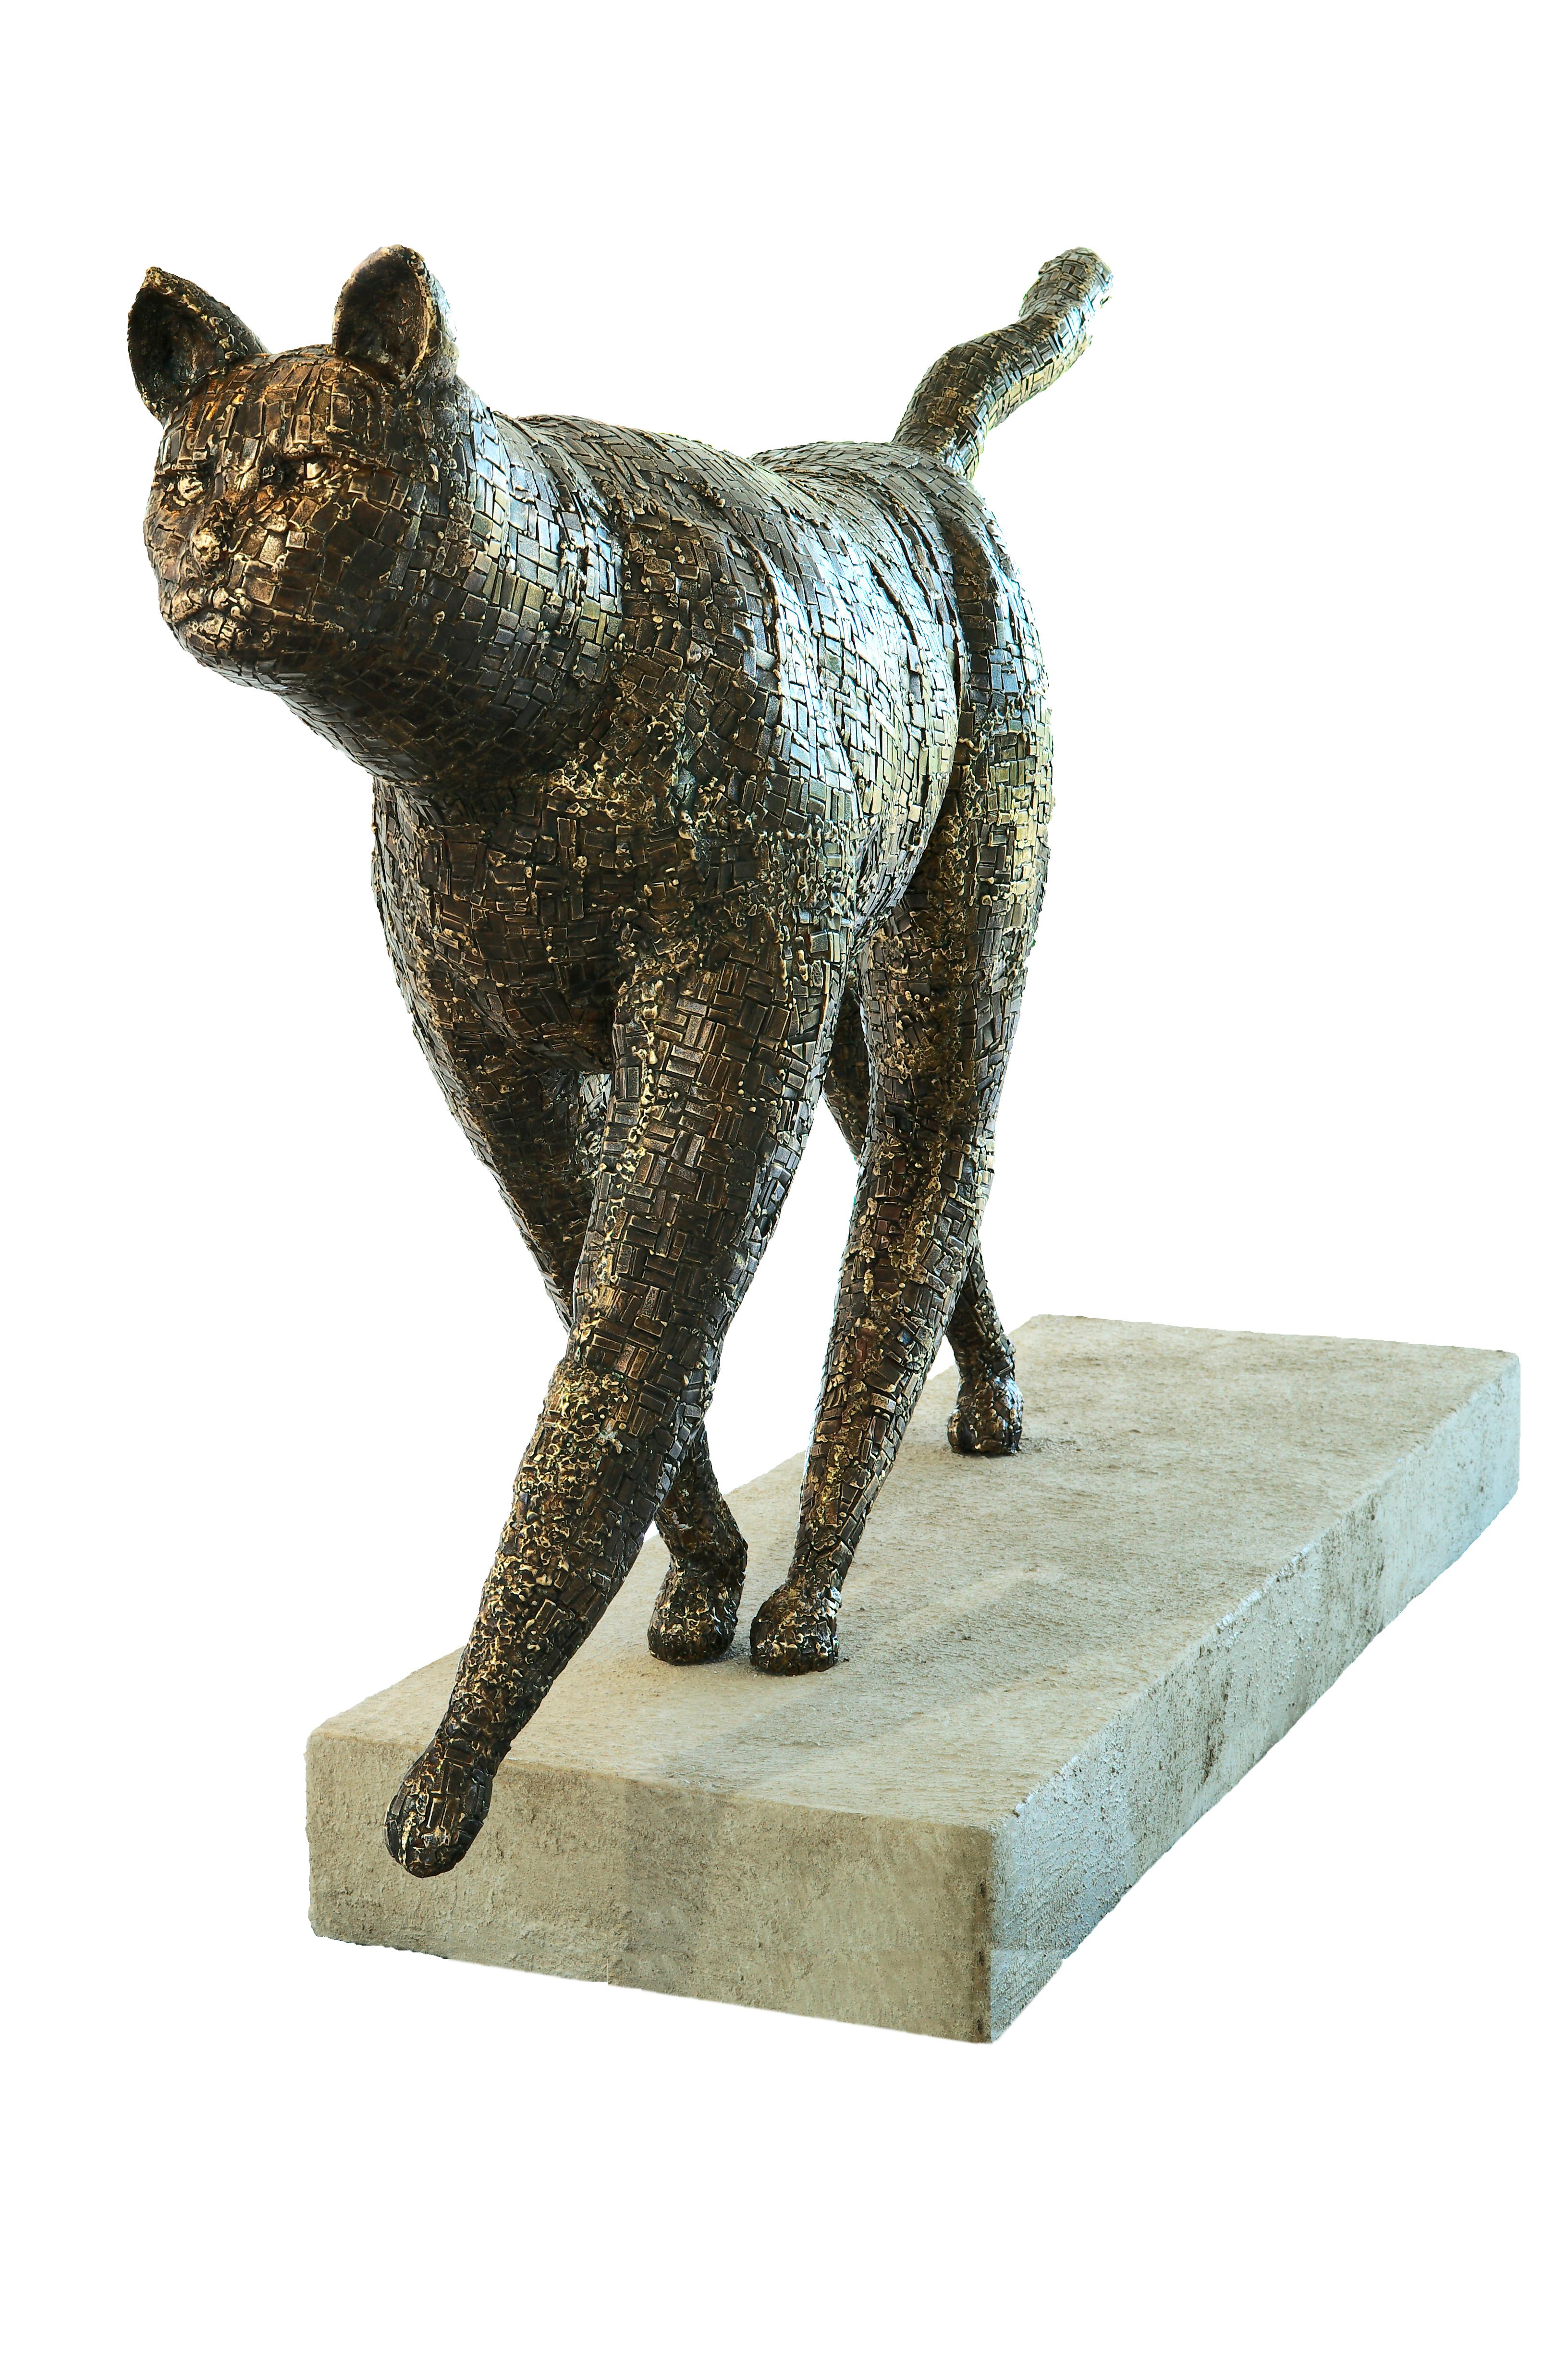 Hand-Crafted Walking Cat - Lion Sized Bronze Cat Sculpture with Mosaic Patterned Surface For Sale